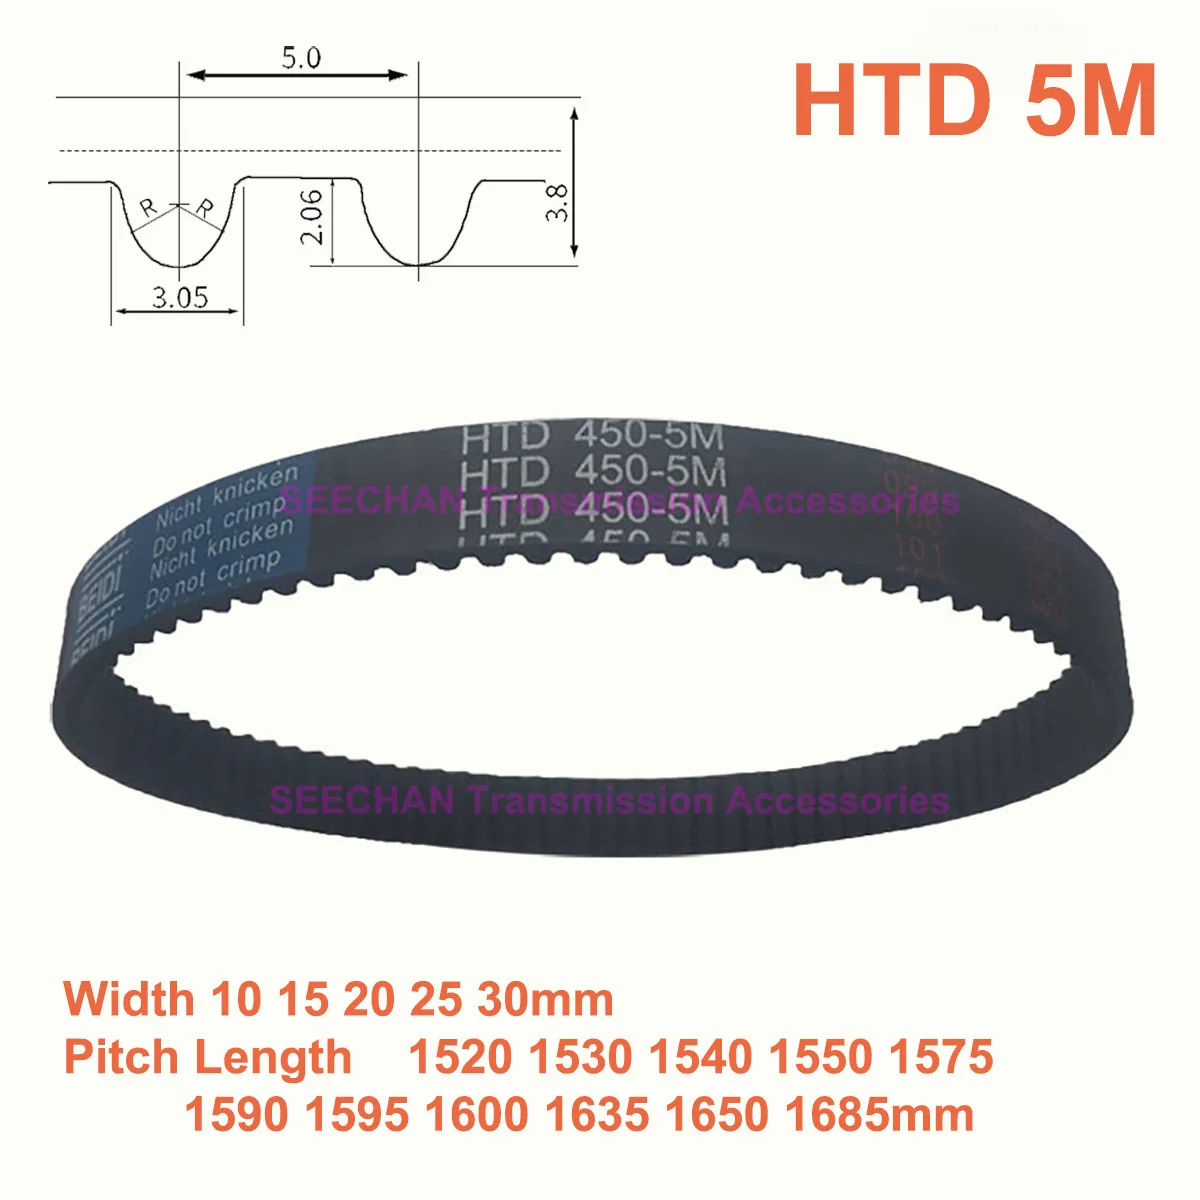 

HTD 5M Rubber Synchronous Timing Belt Width 10 15 20 25 30mm Perimeter 1520 1530 1540 1550 1575 1590 1595 1600 1635 1650 1685mm